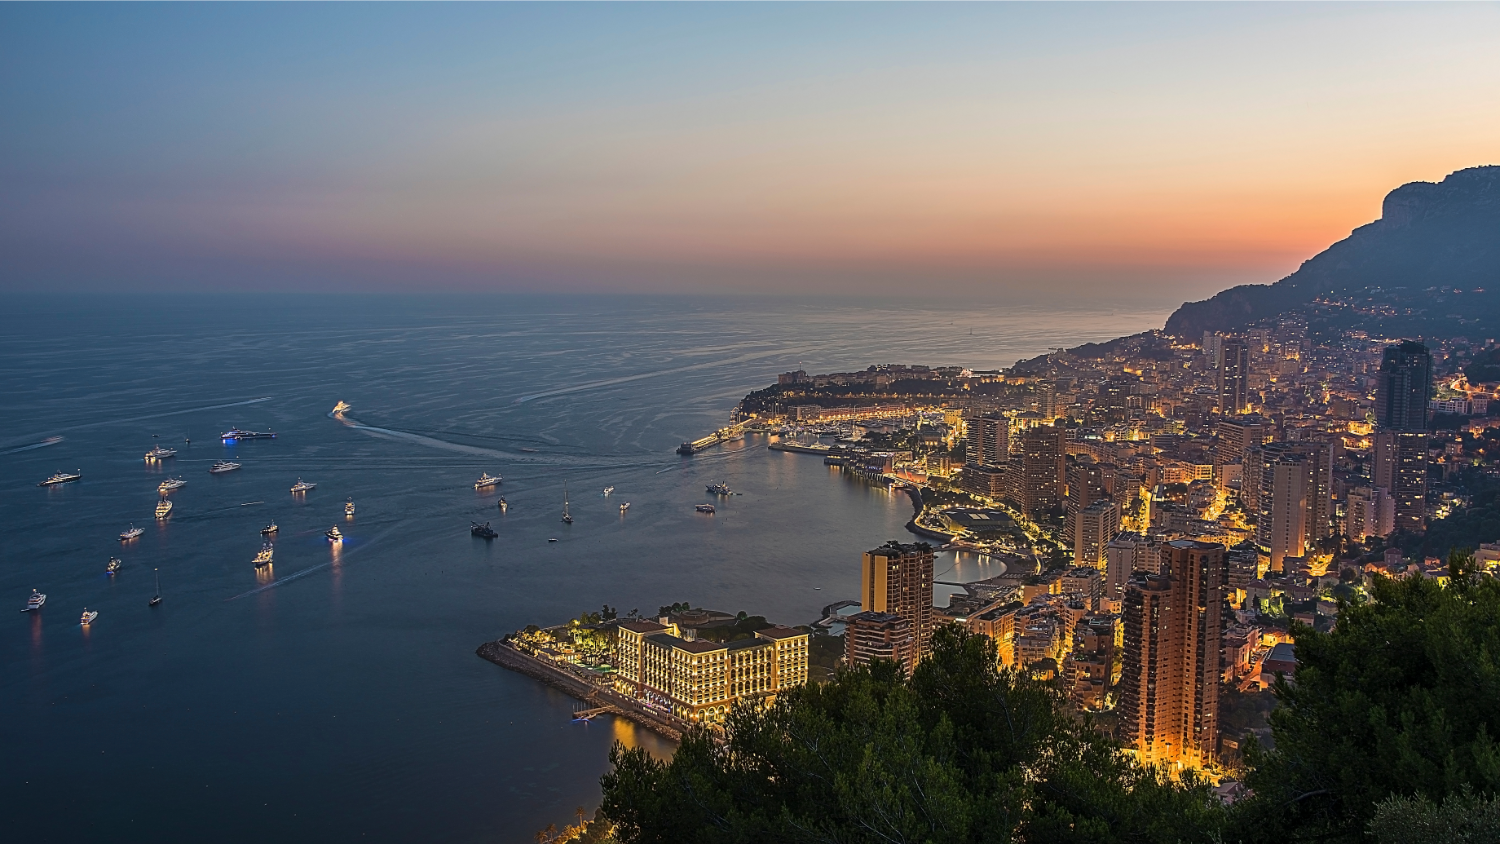 View from the hills above Monaco at dusk with glowing lights. The first destination-on this Monte Carlo Cruise